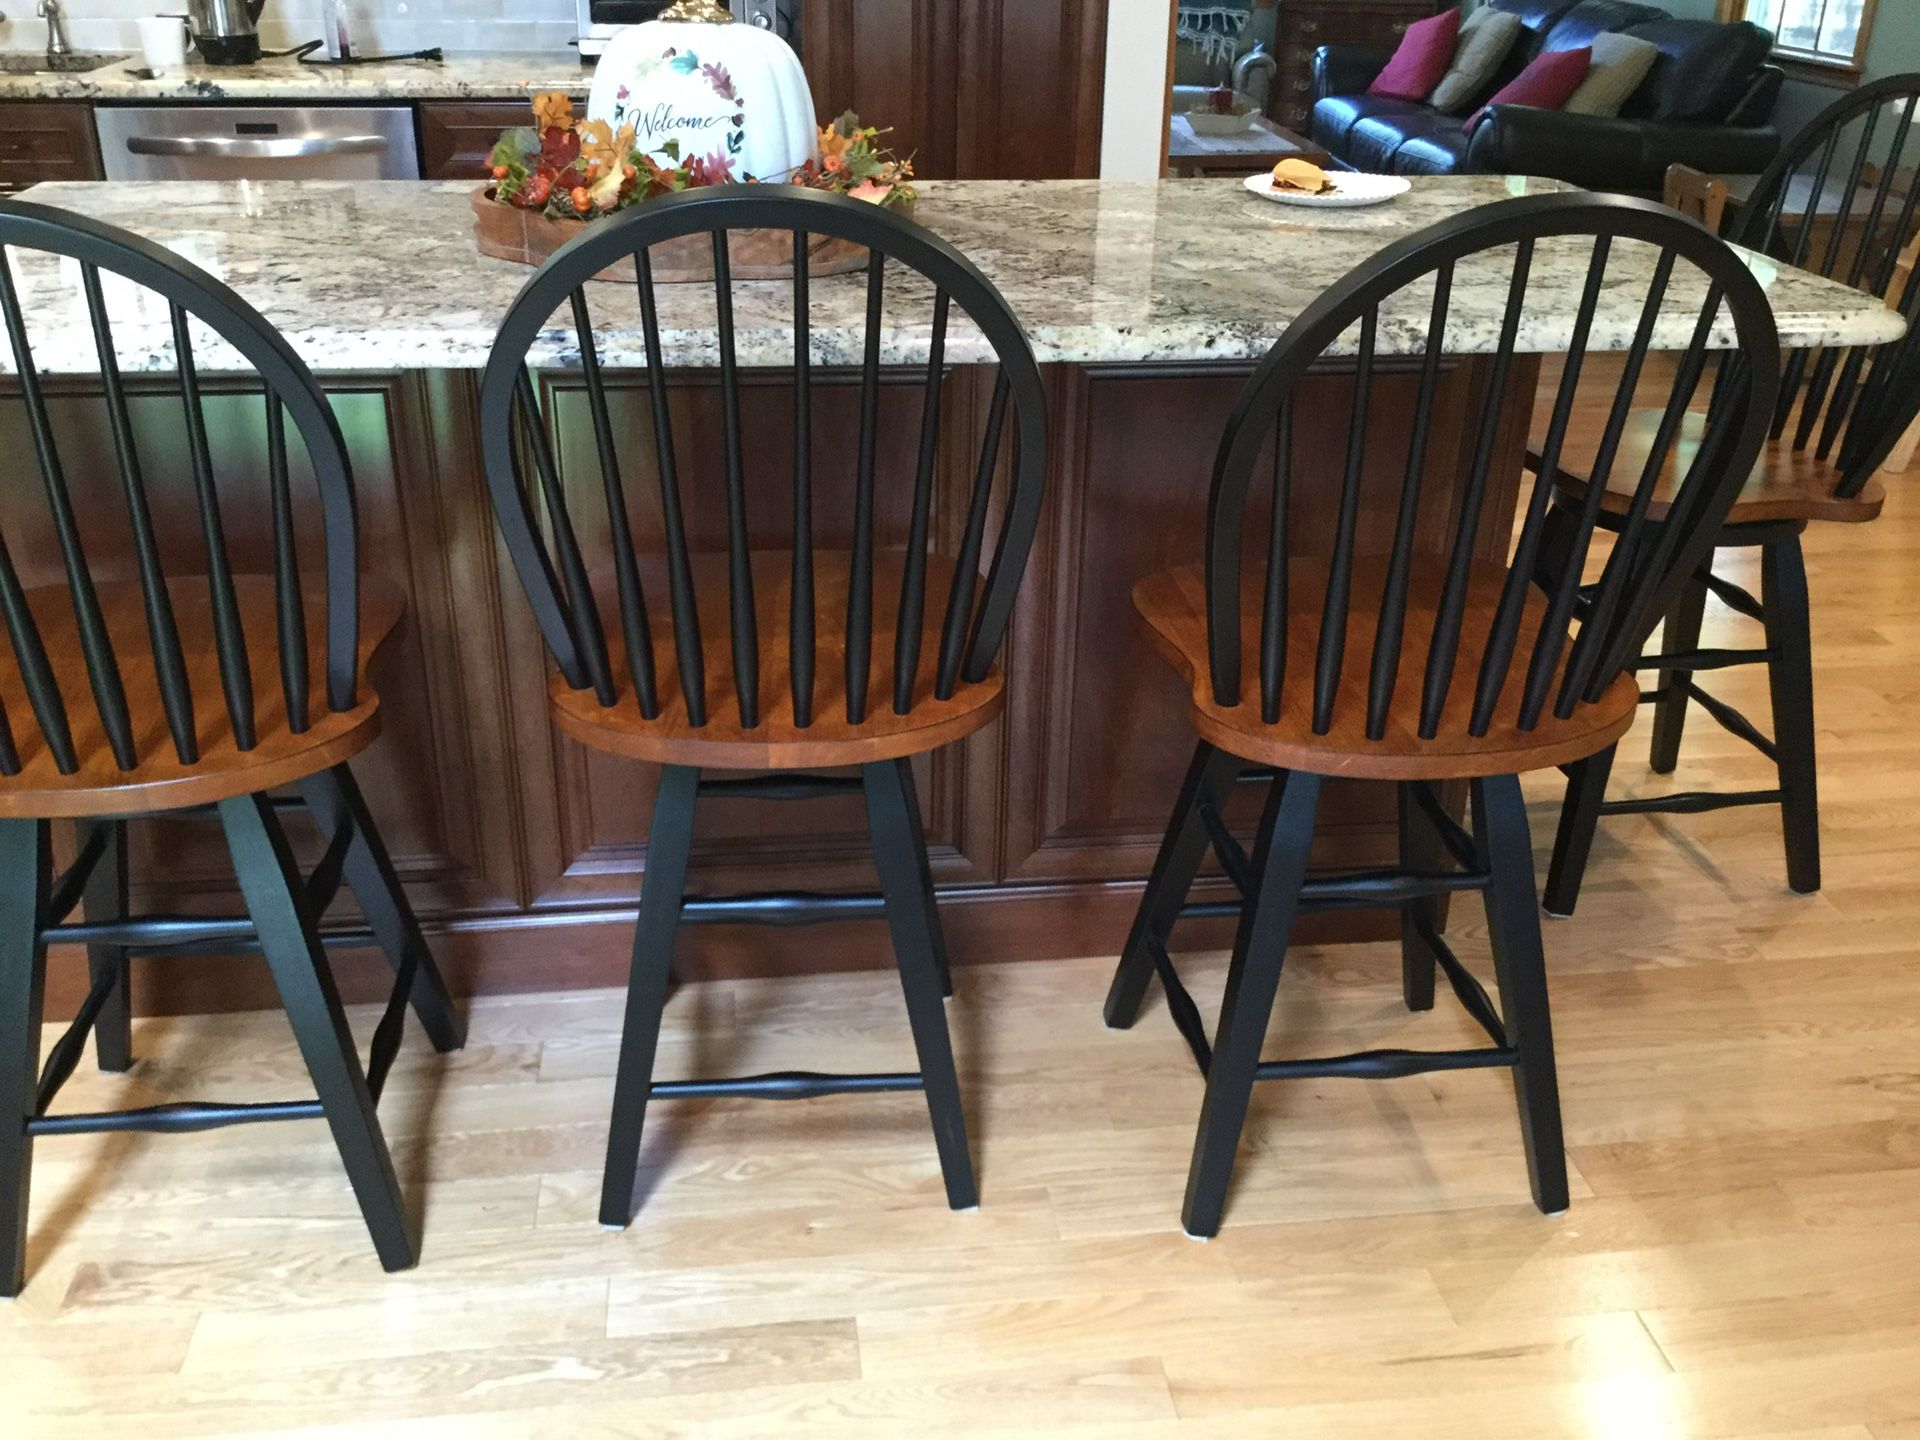 4 New solid wood 24 inch bar stools